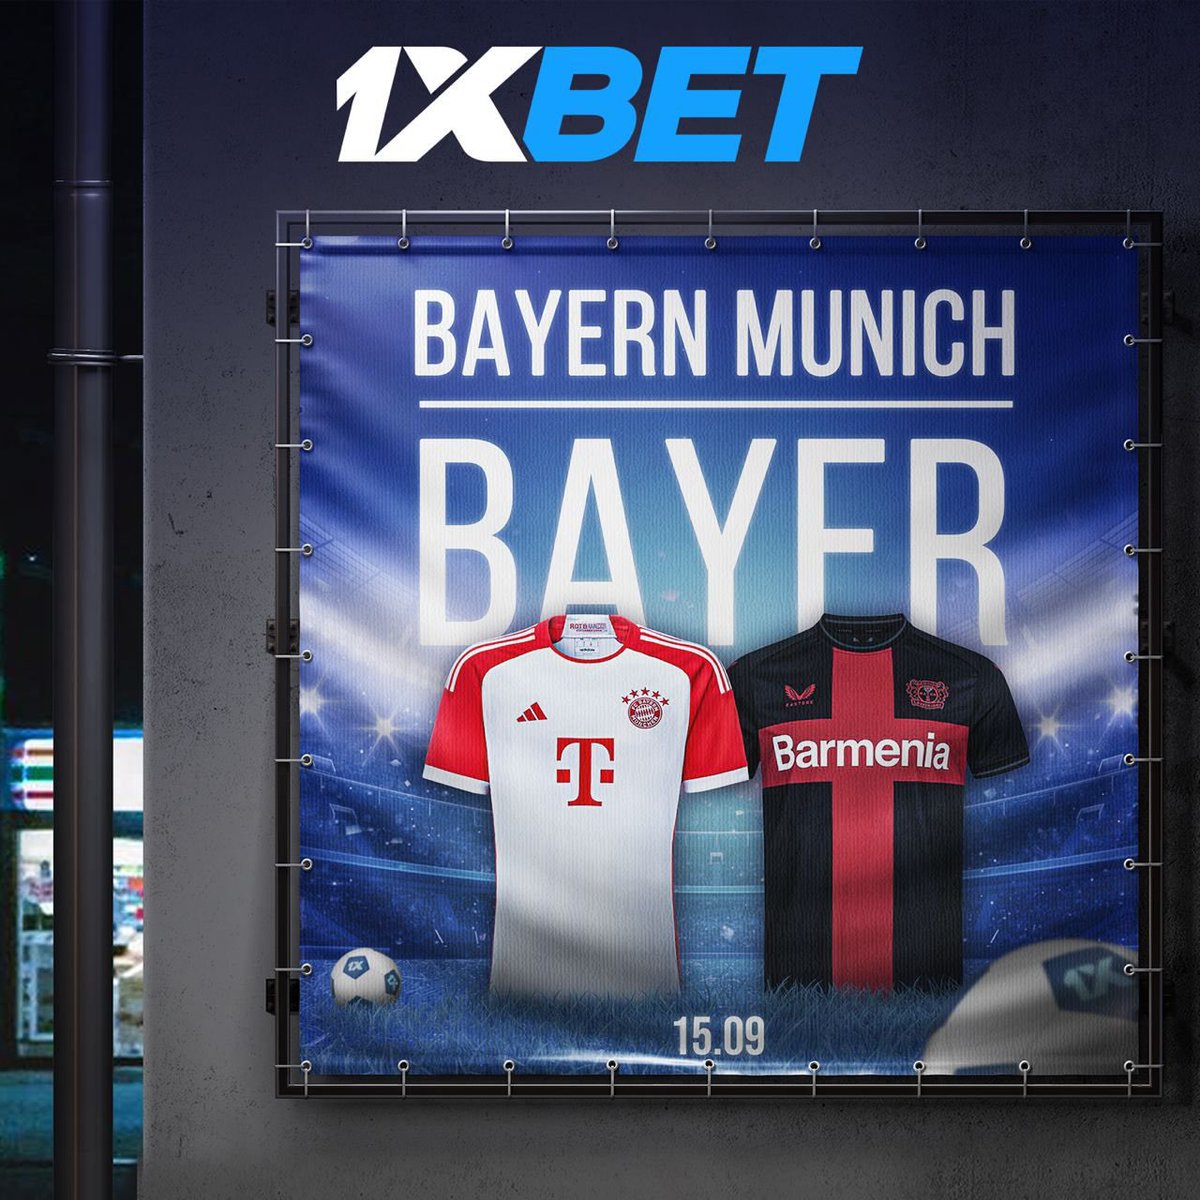 🇩🇪💥Championship record holder Bayern take on Bayer Leverkusen

Make your prediction and add intrigue to the match with 1xBet!

Using the link ➡️ bit.ly/447KINS and promo code: FRANKCUTEX for bonus on your win ⚽️🔥